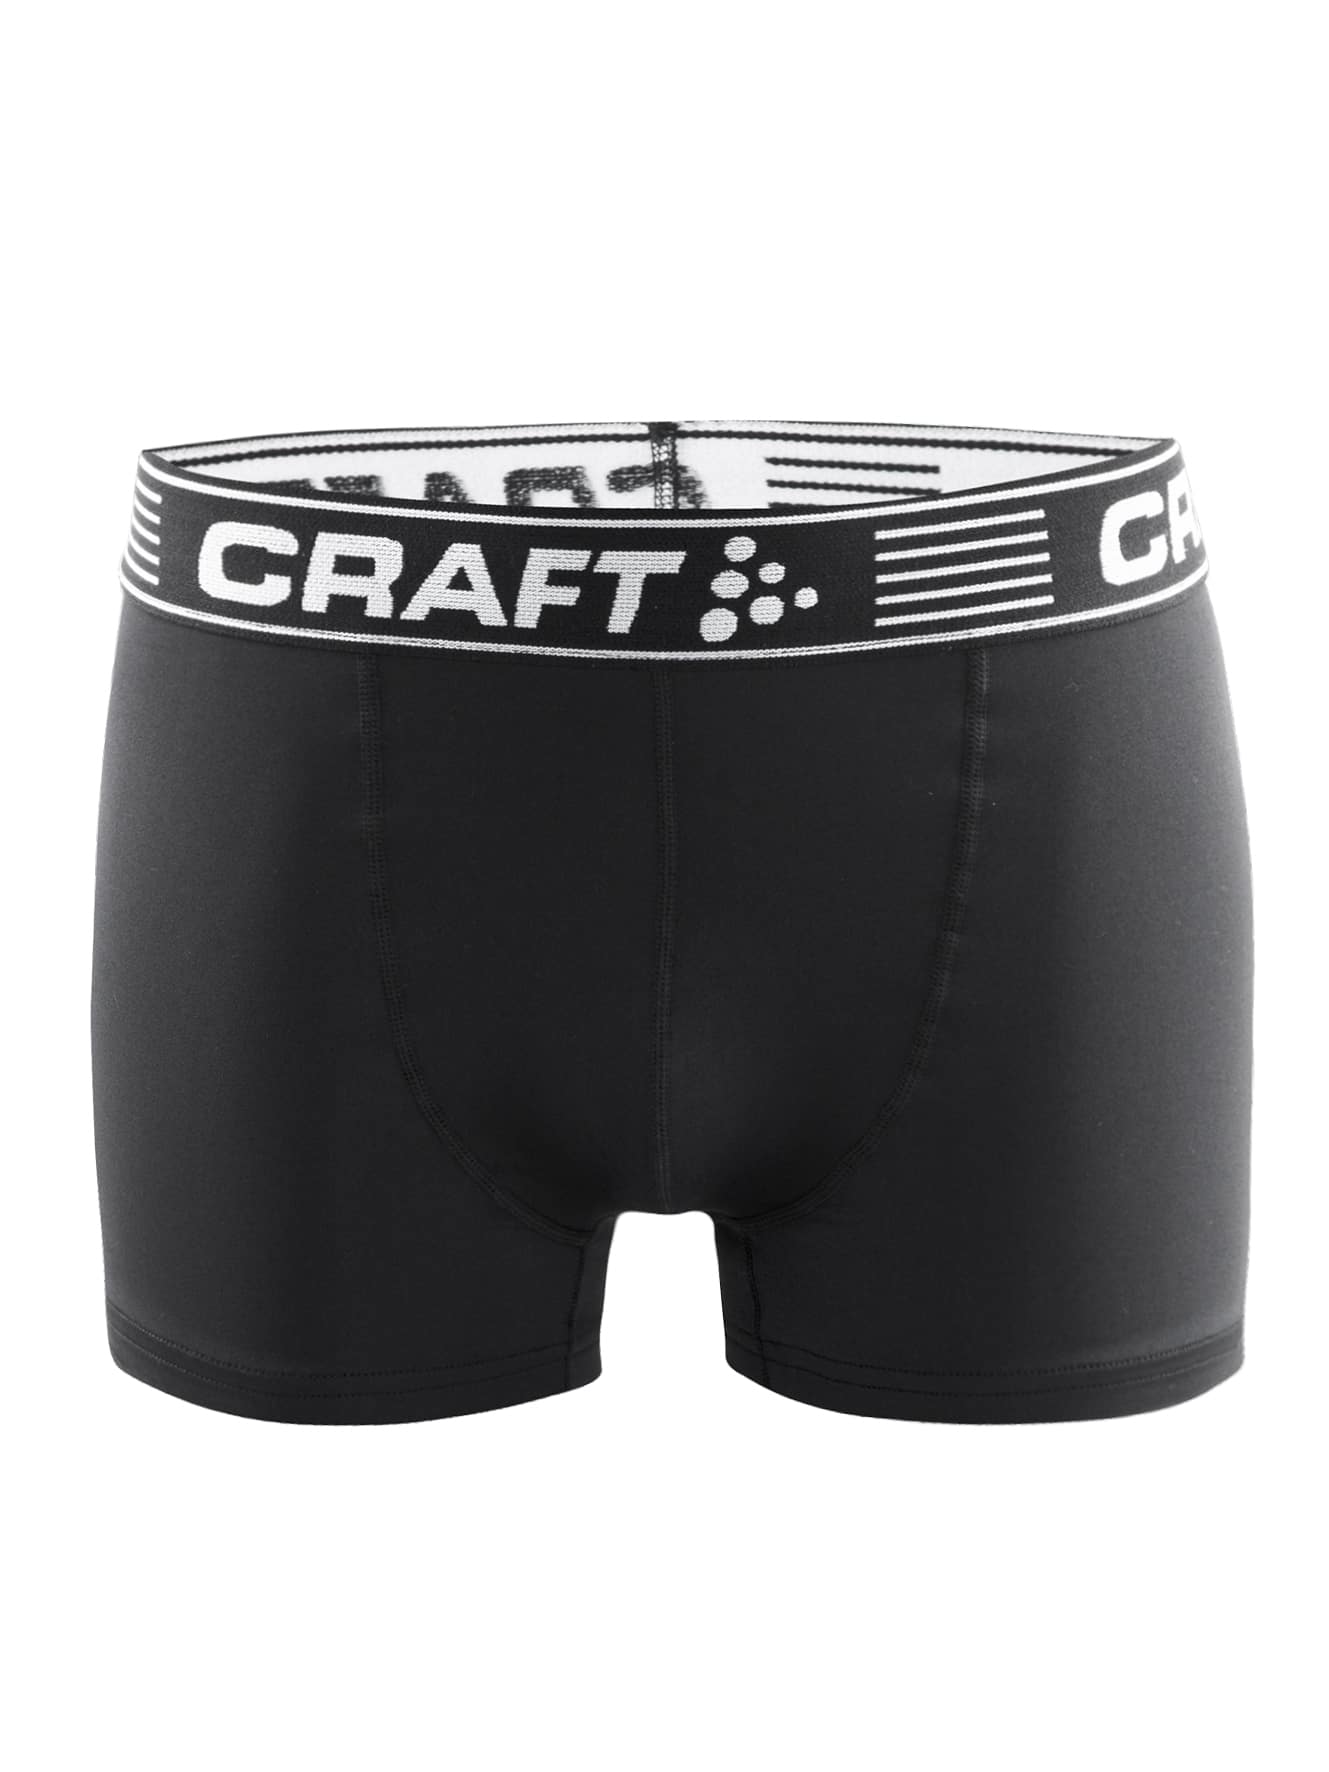 Craft - Greatness Boxer 3-Inch Maend - Black/White S